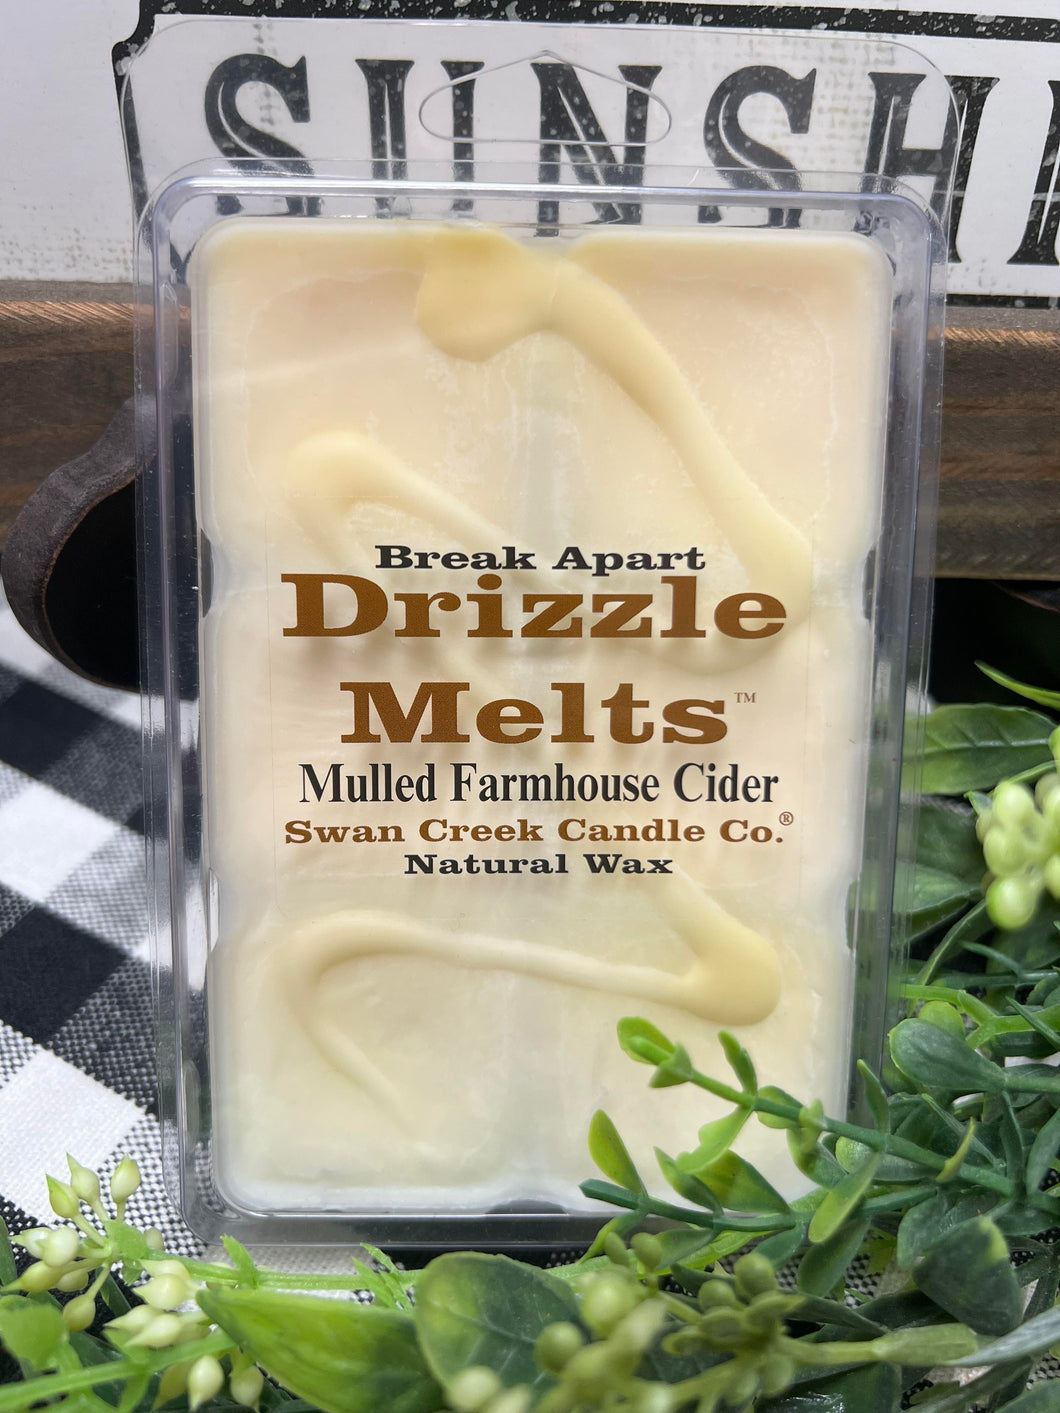 Swan Creek Candle Co. Mulled Farmhouse Cider Drizzle Melts